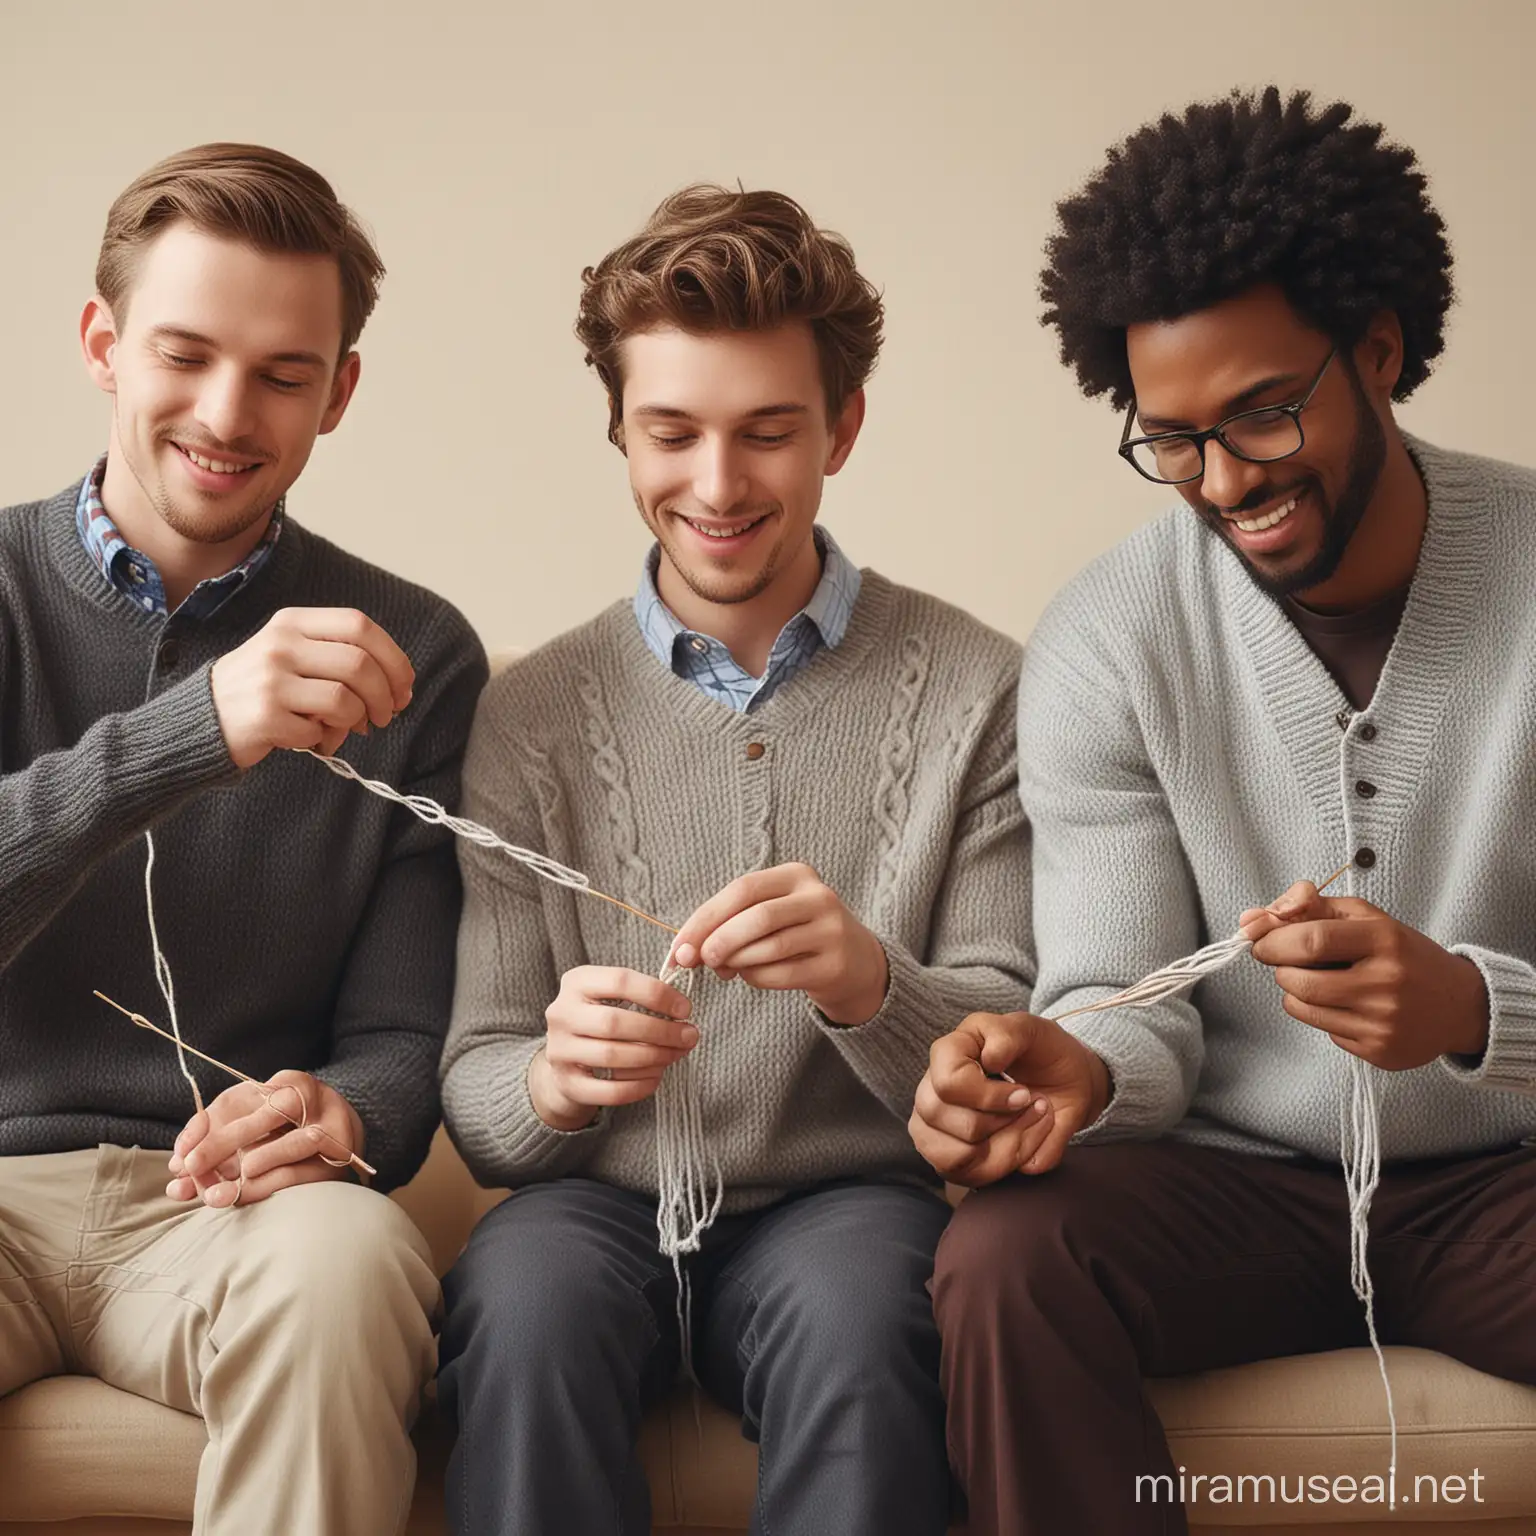 Two white guys and a black guy knitting